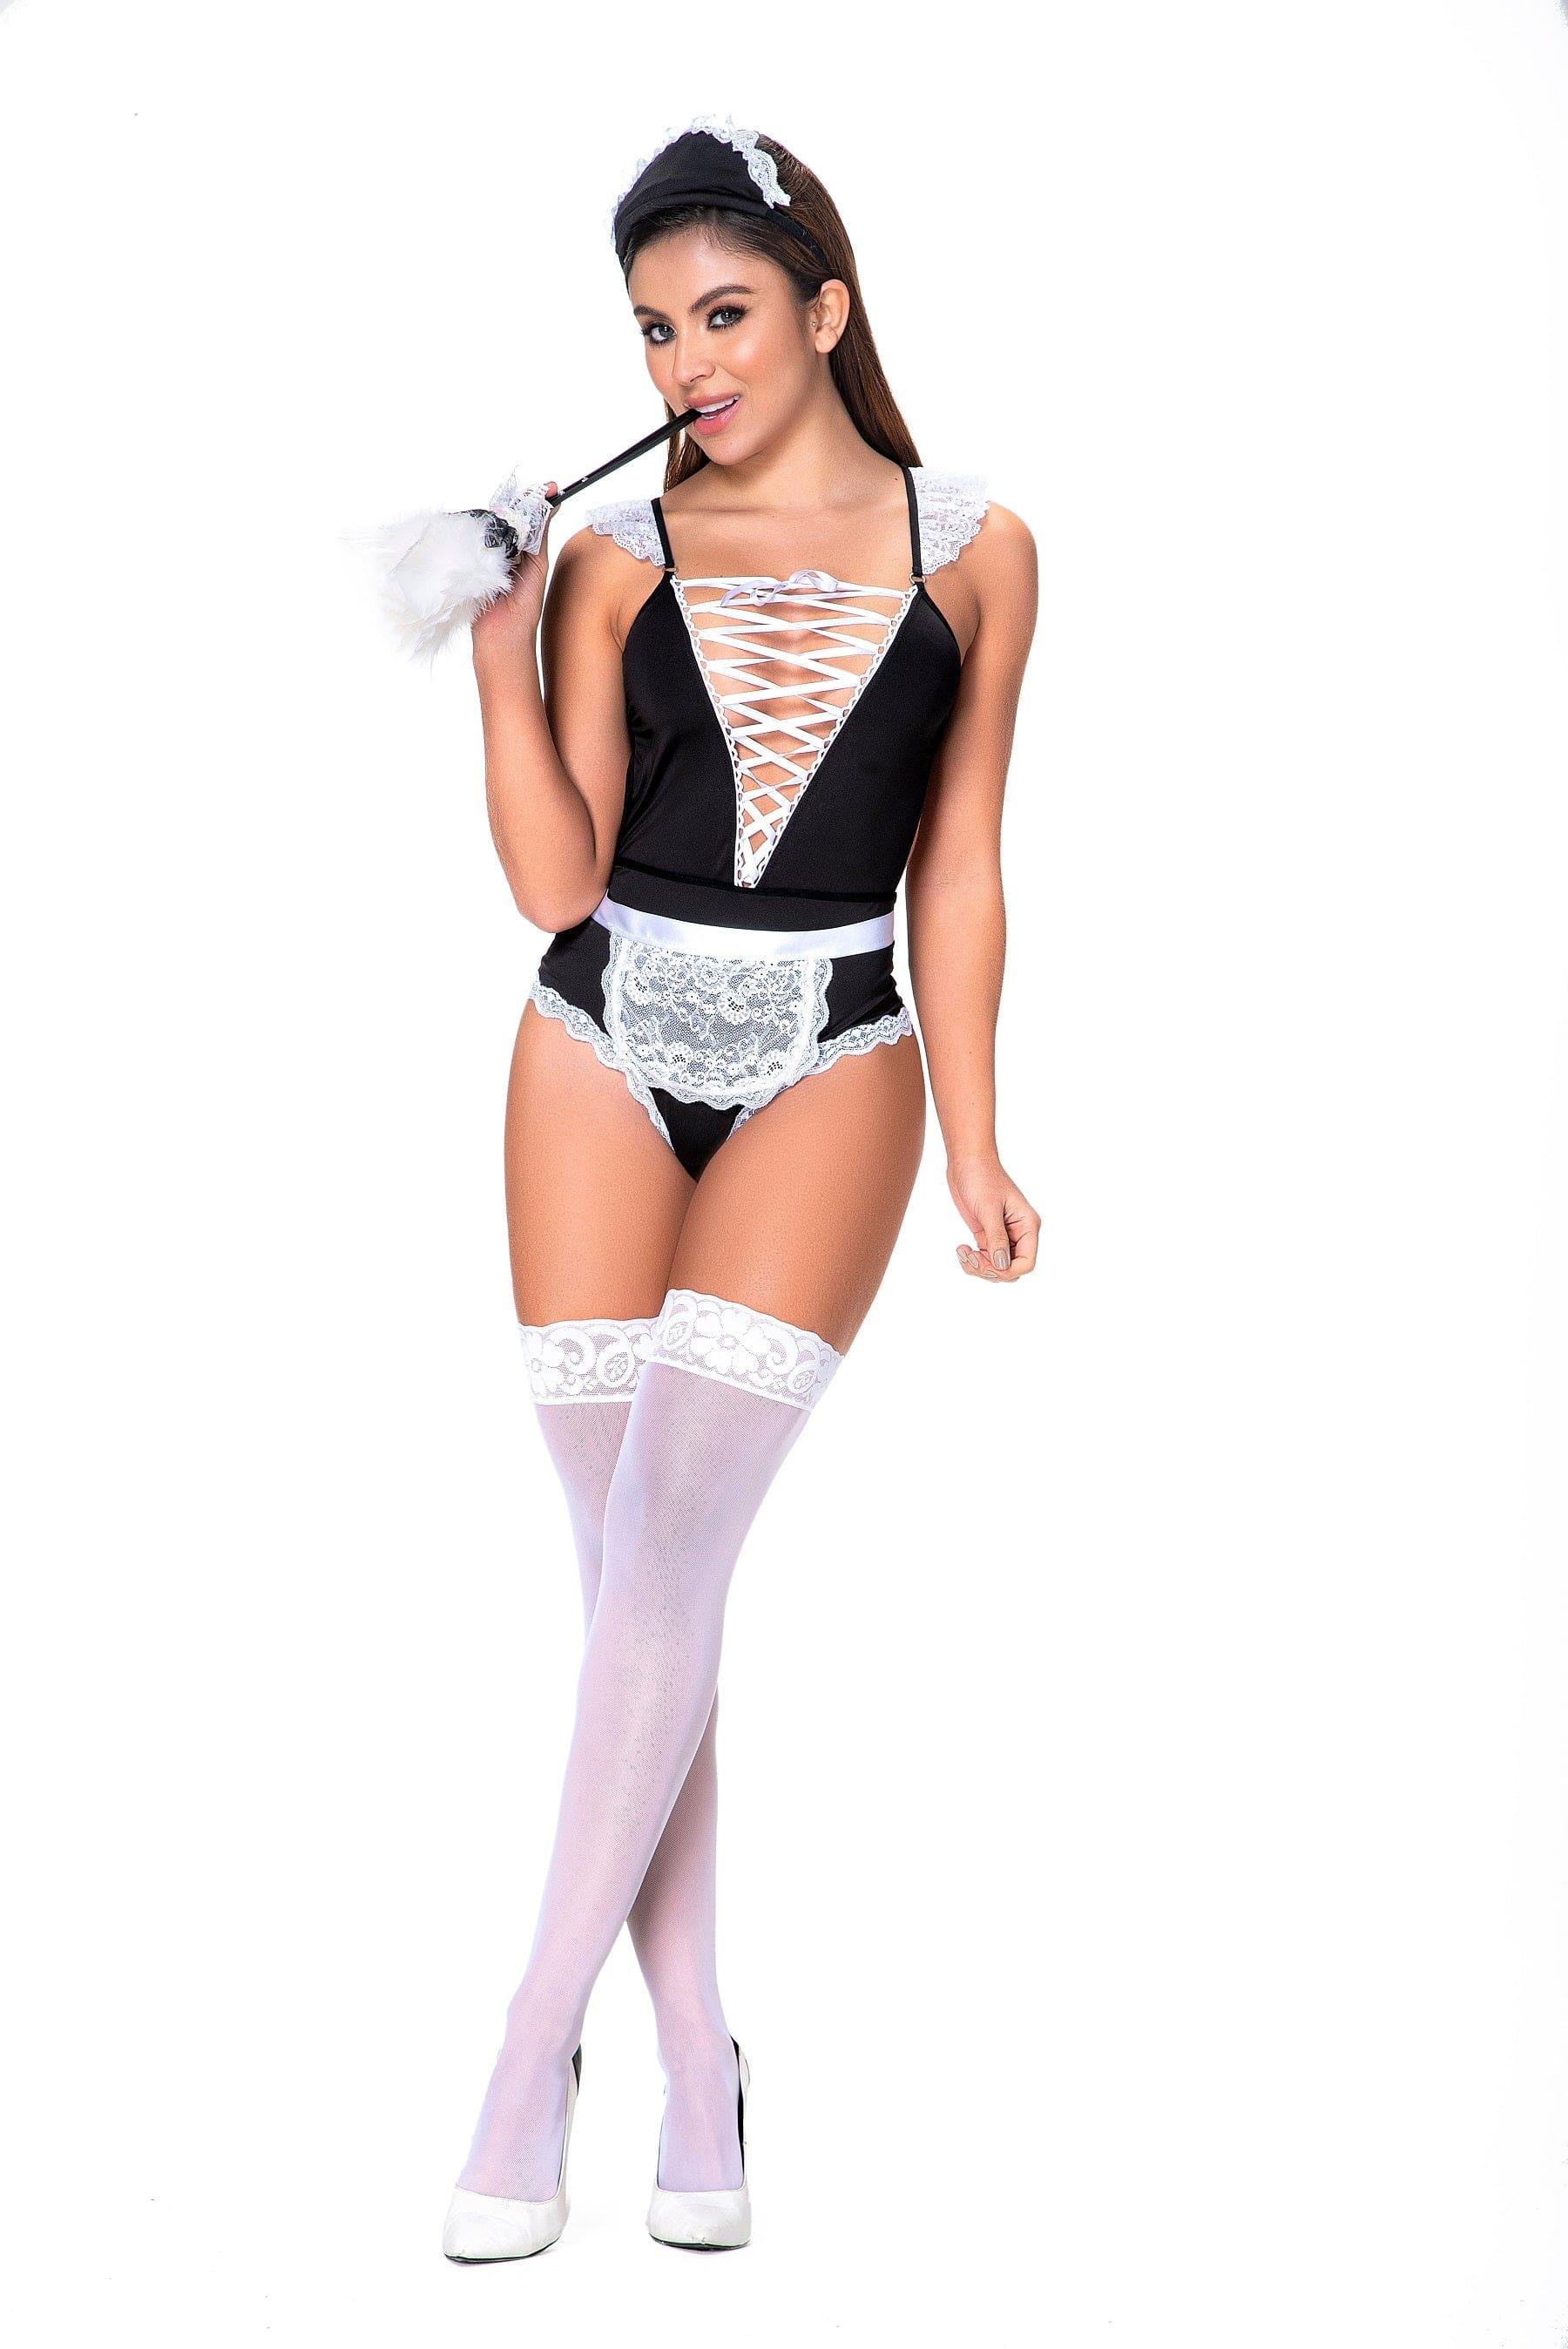 Mapalé Costumes Medium / Large / As shown French Maid Costume